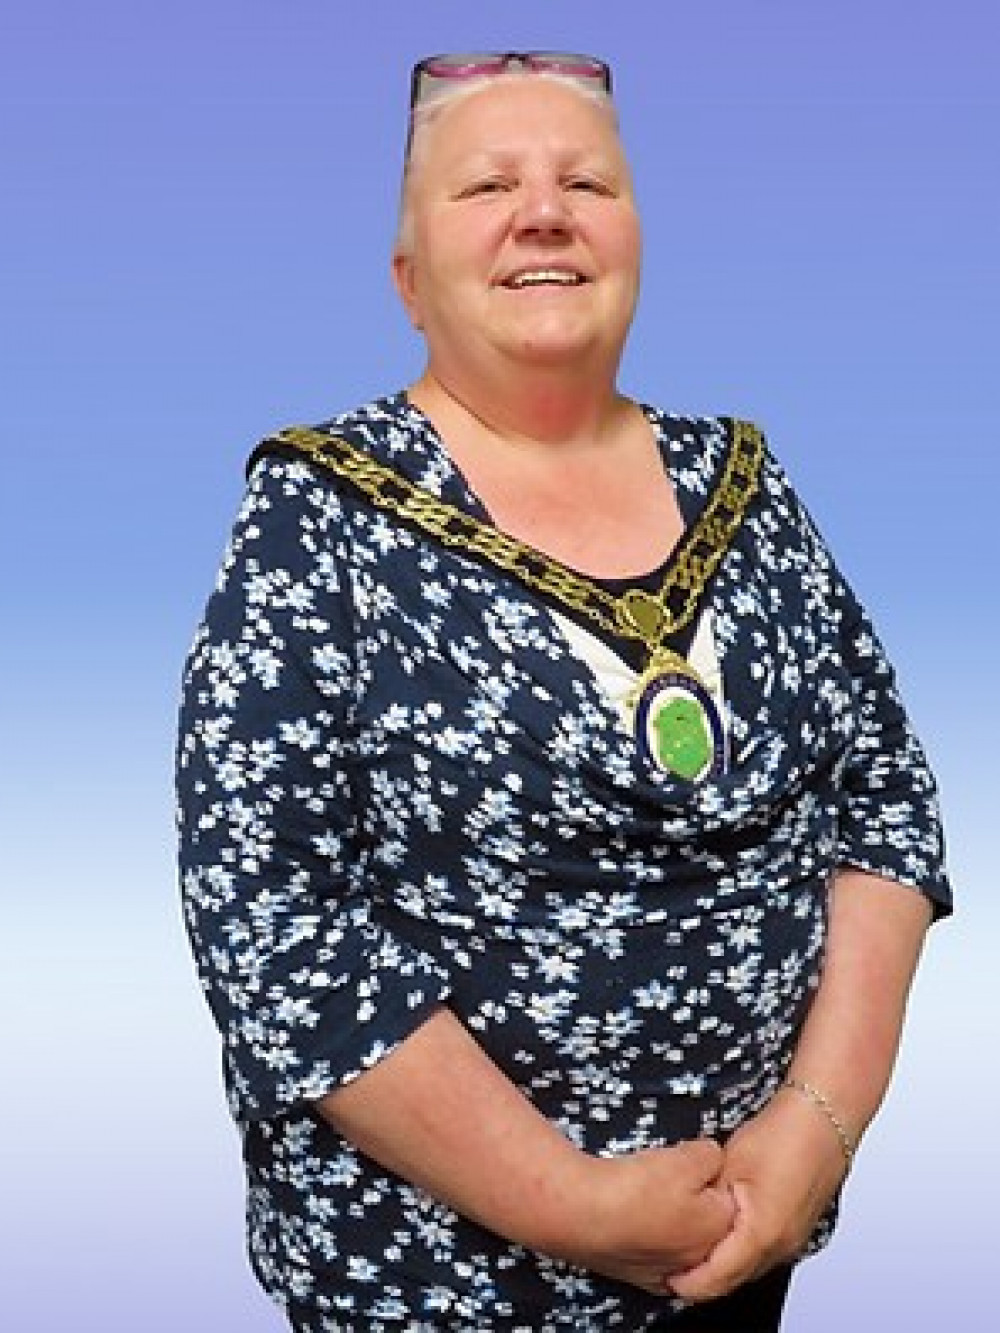 Sally-Anne Wadsworth in her regalia (image courtesy of Martin Brookes)